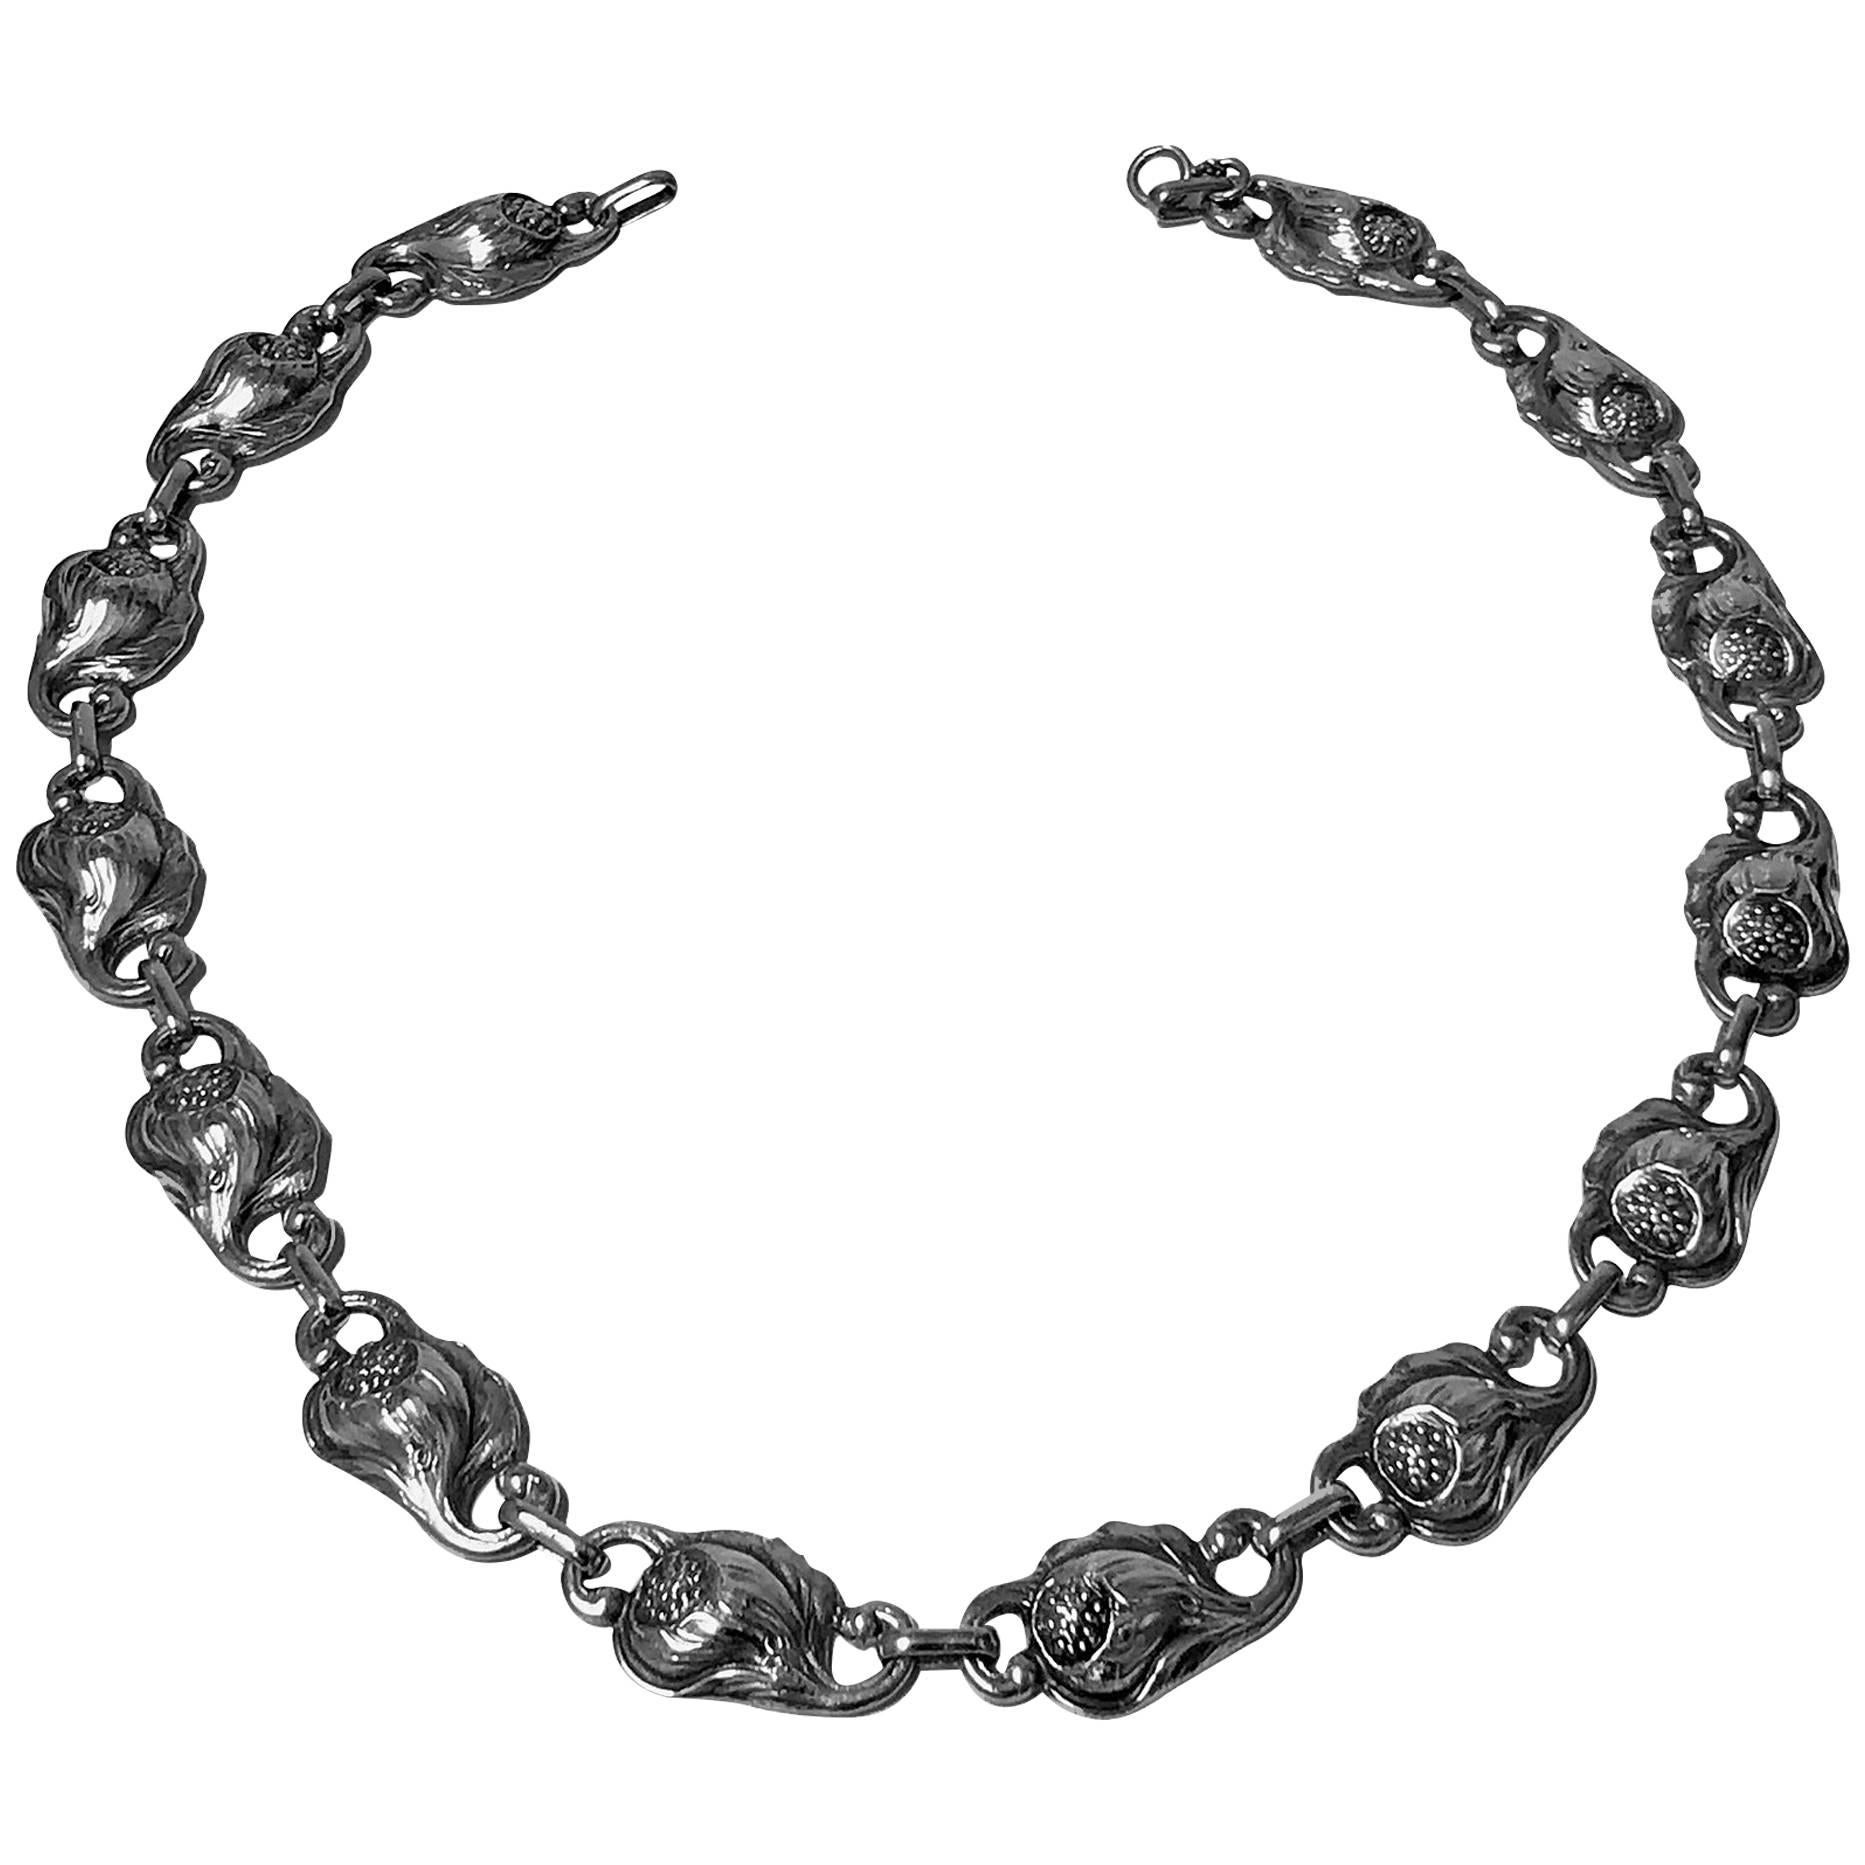 Carl Poul Petersen Handmade Sterling Silver Necklace, Montreal, circa 1940